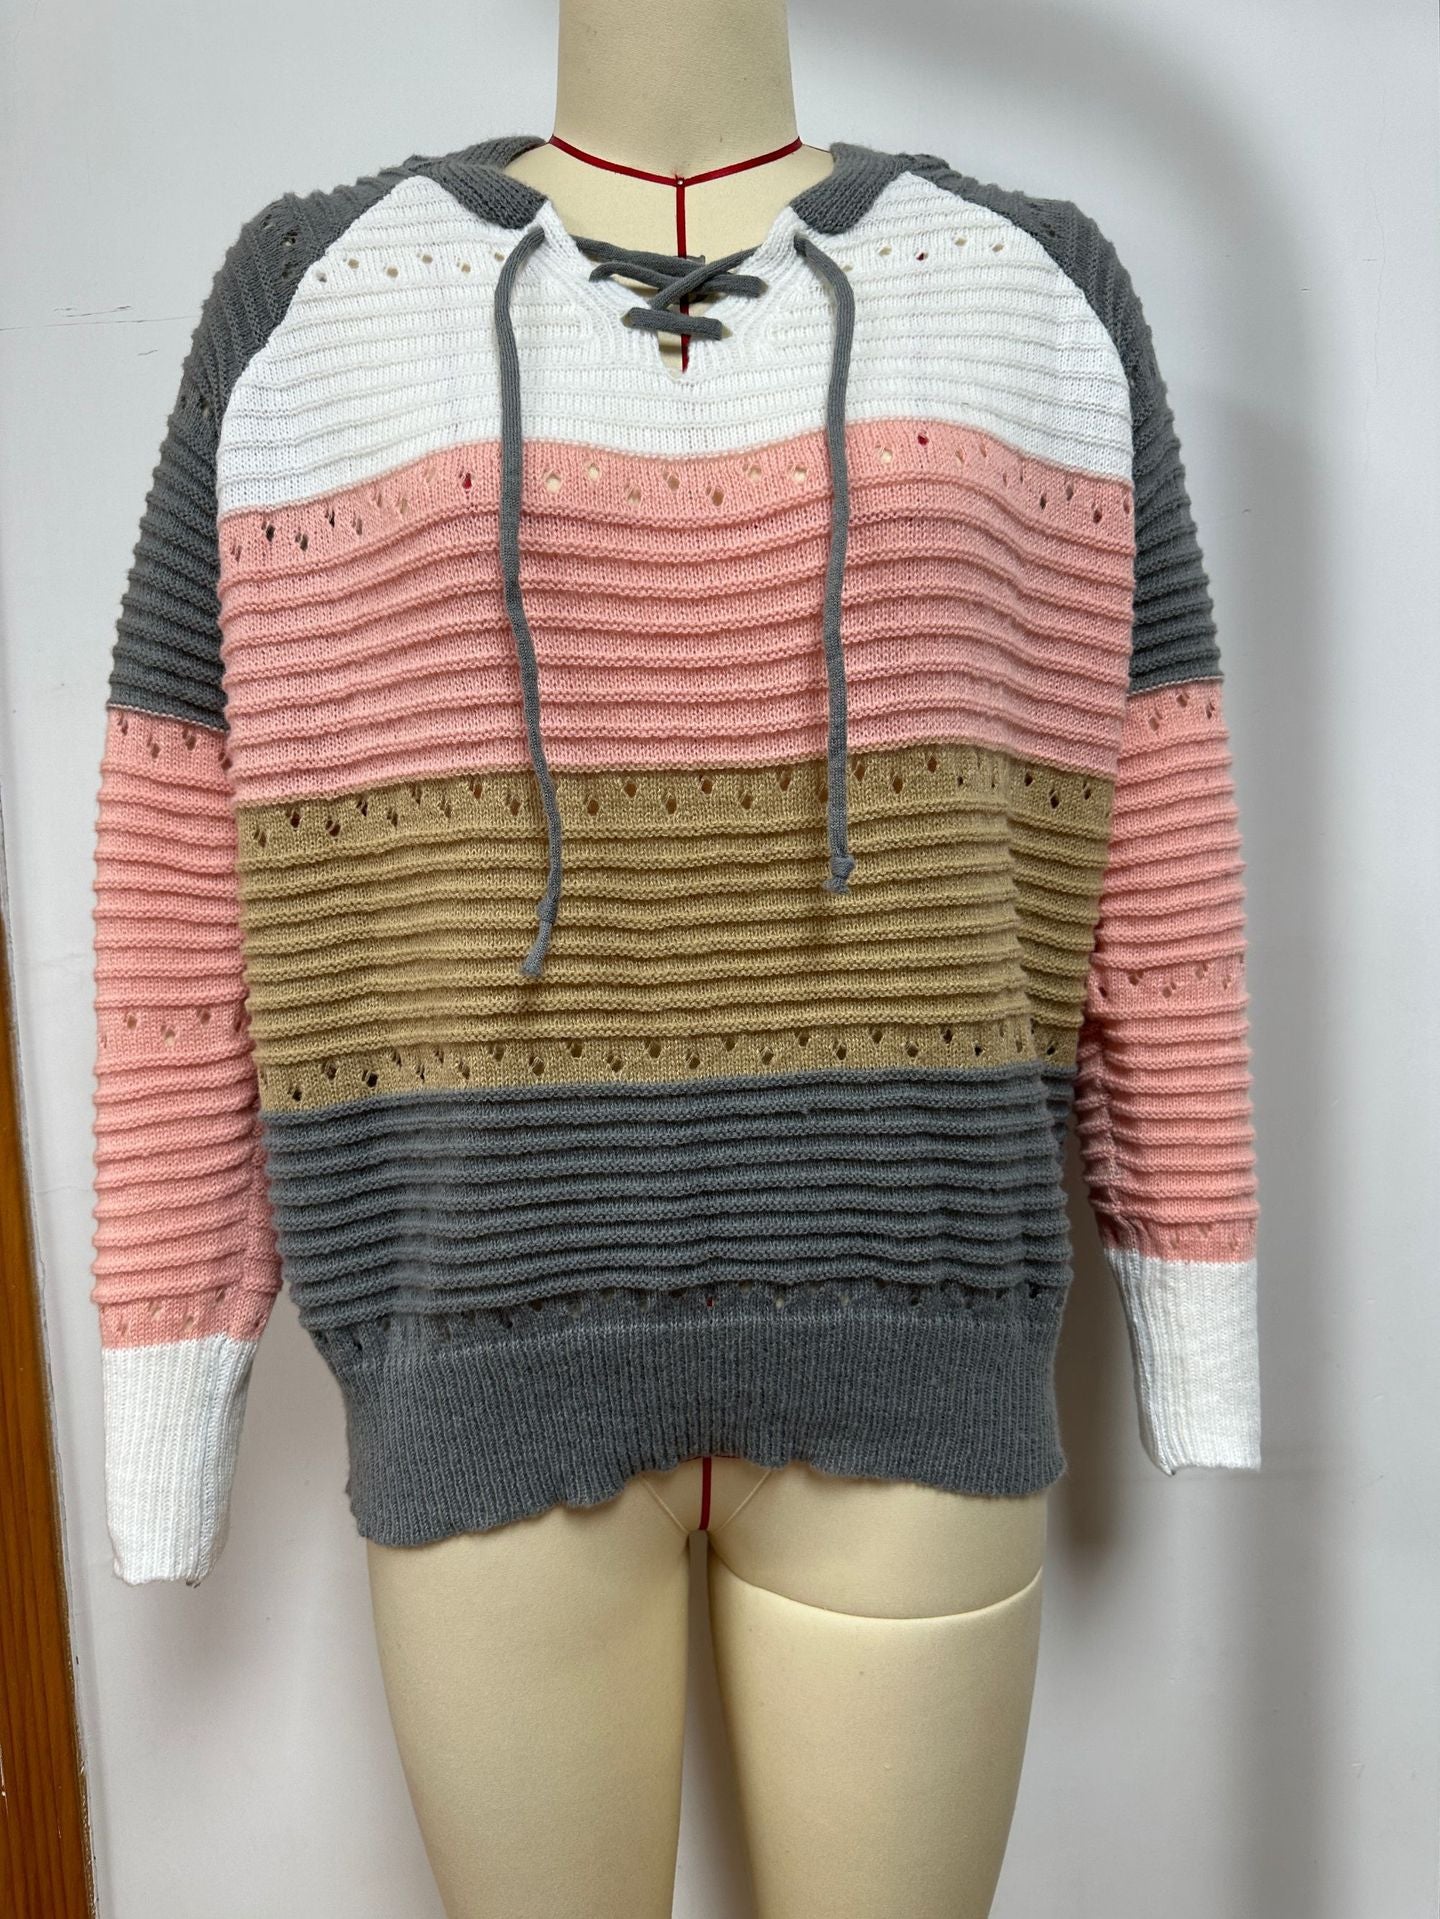 Women's Striped Hooded Knitted Pullover Casual Color Sweaters